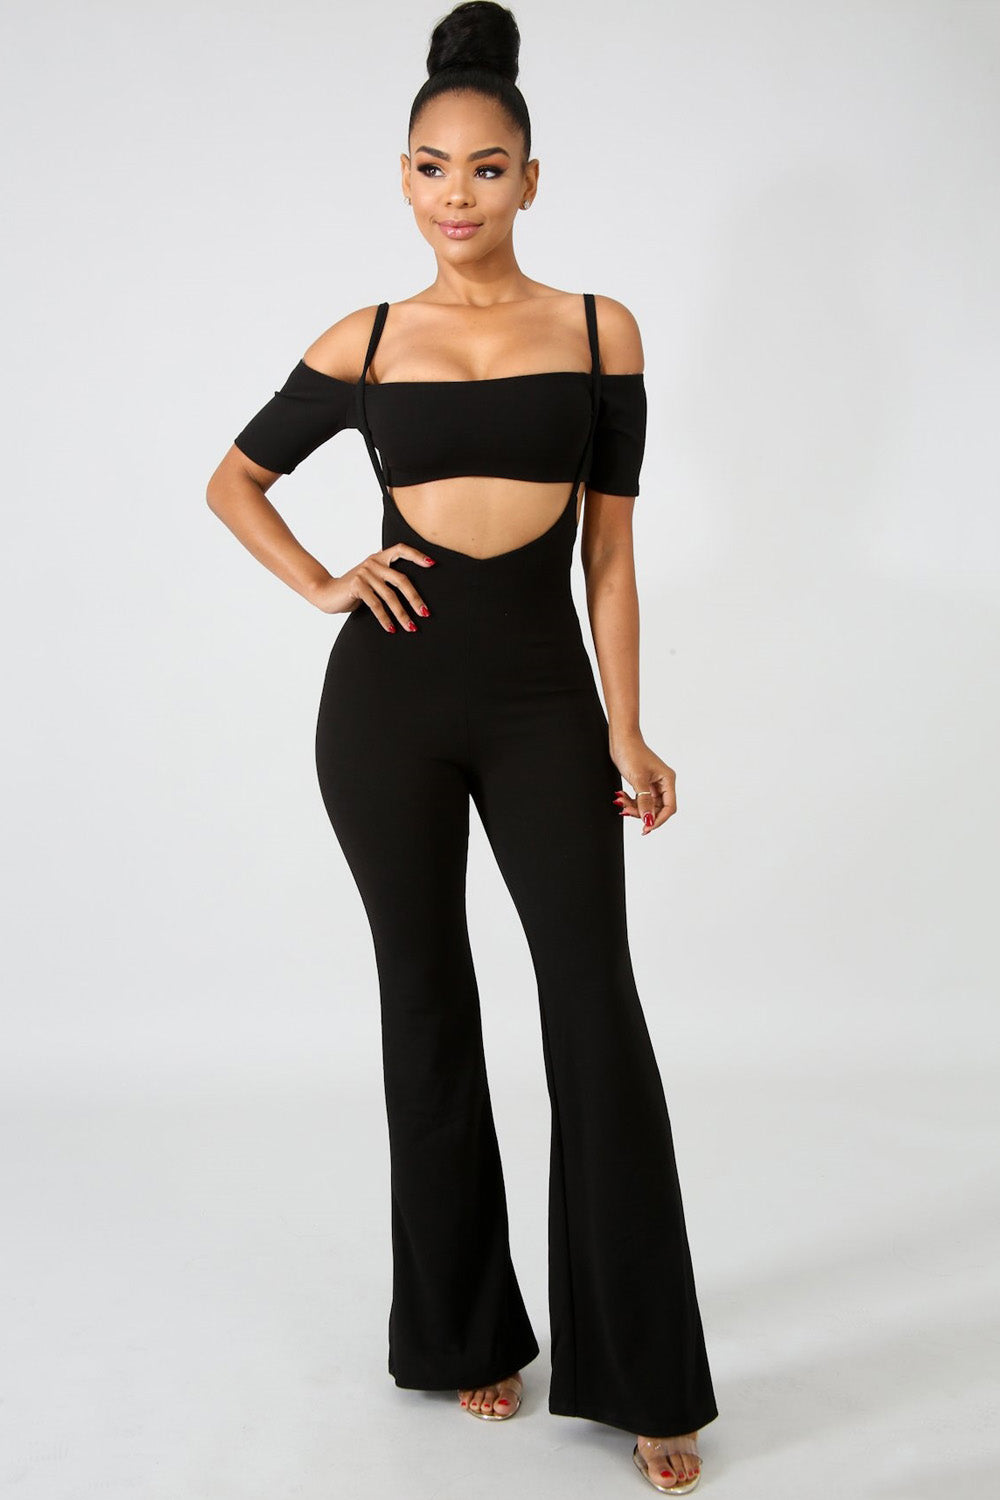 goPals black jumpsuit with bandeau top and flare legs. 